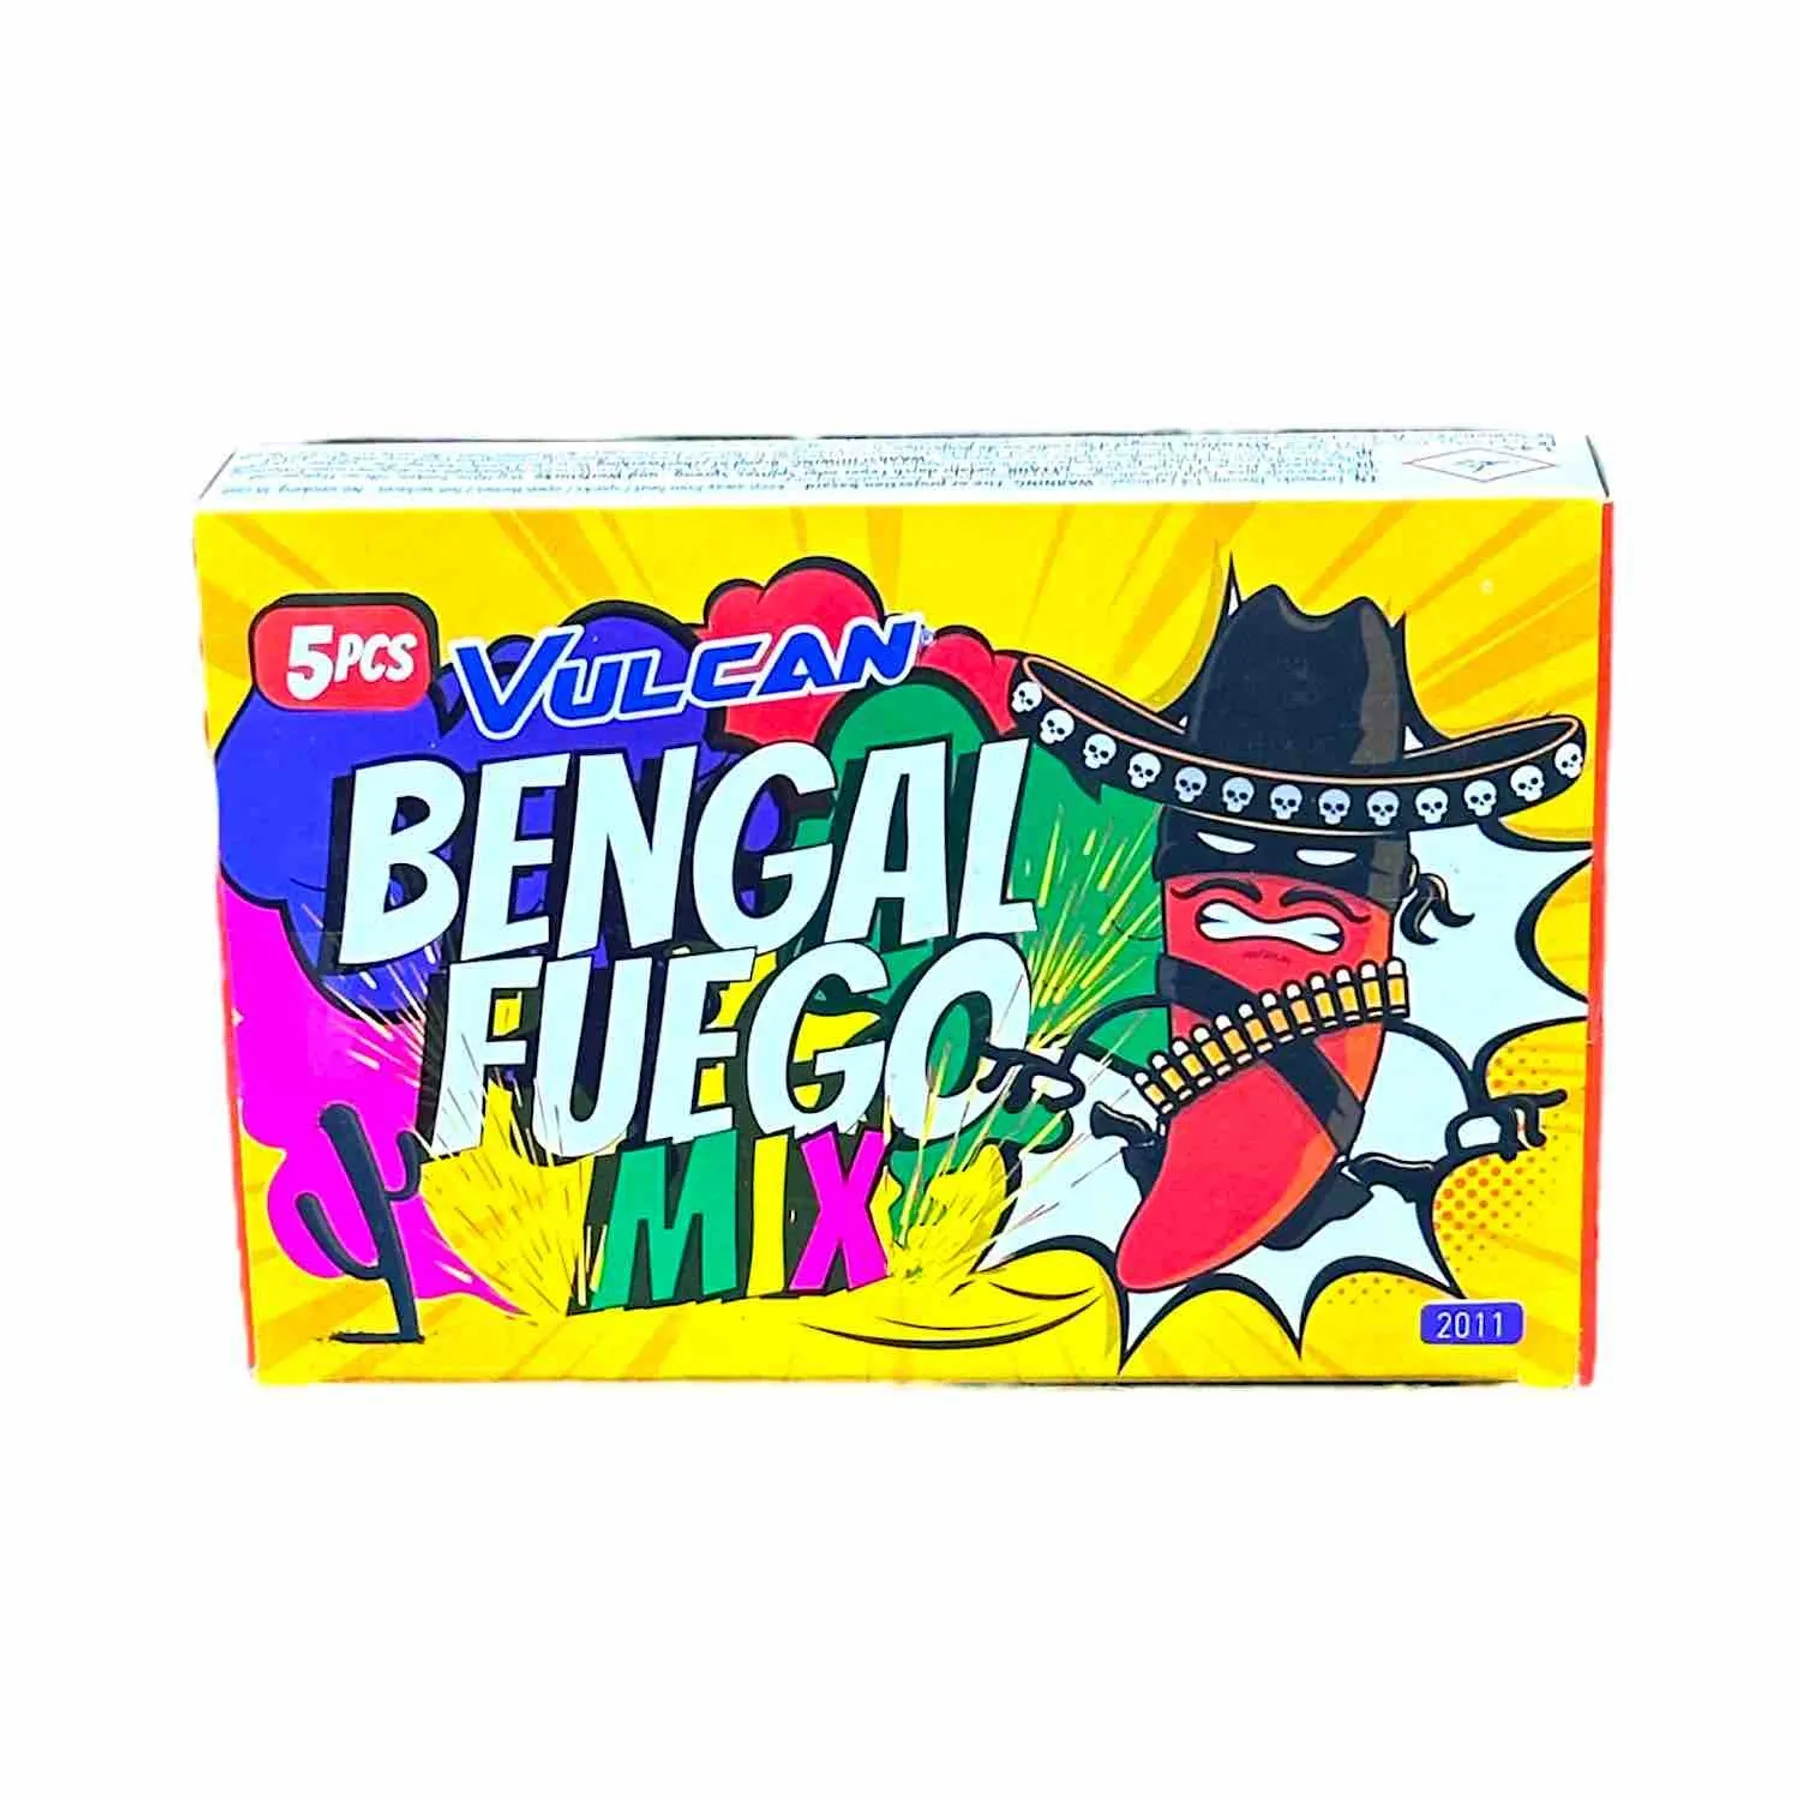 Bengal Fuego Mix 5 Outside Box Vulcan Manchester Fireworks